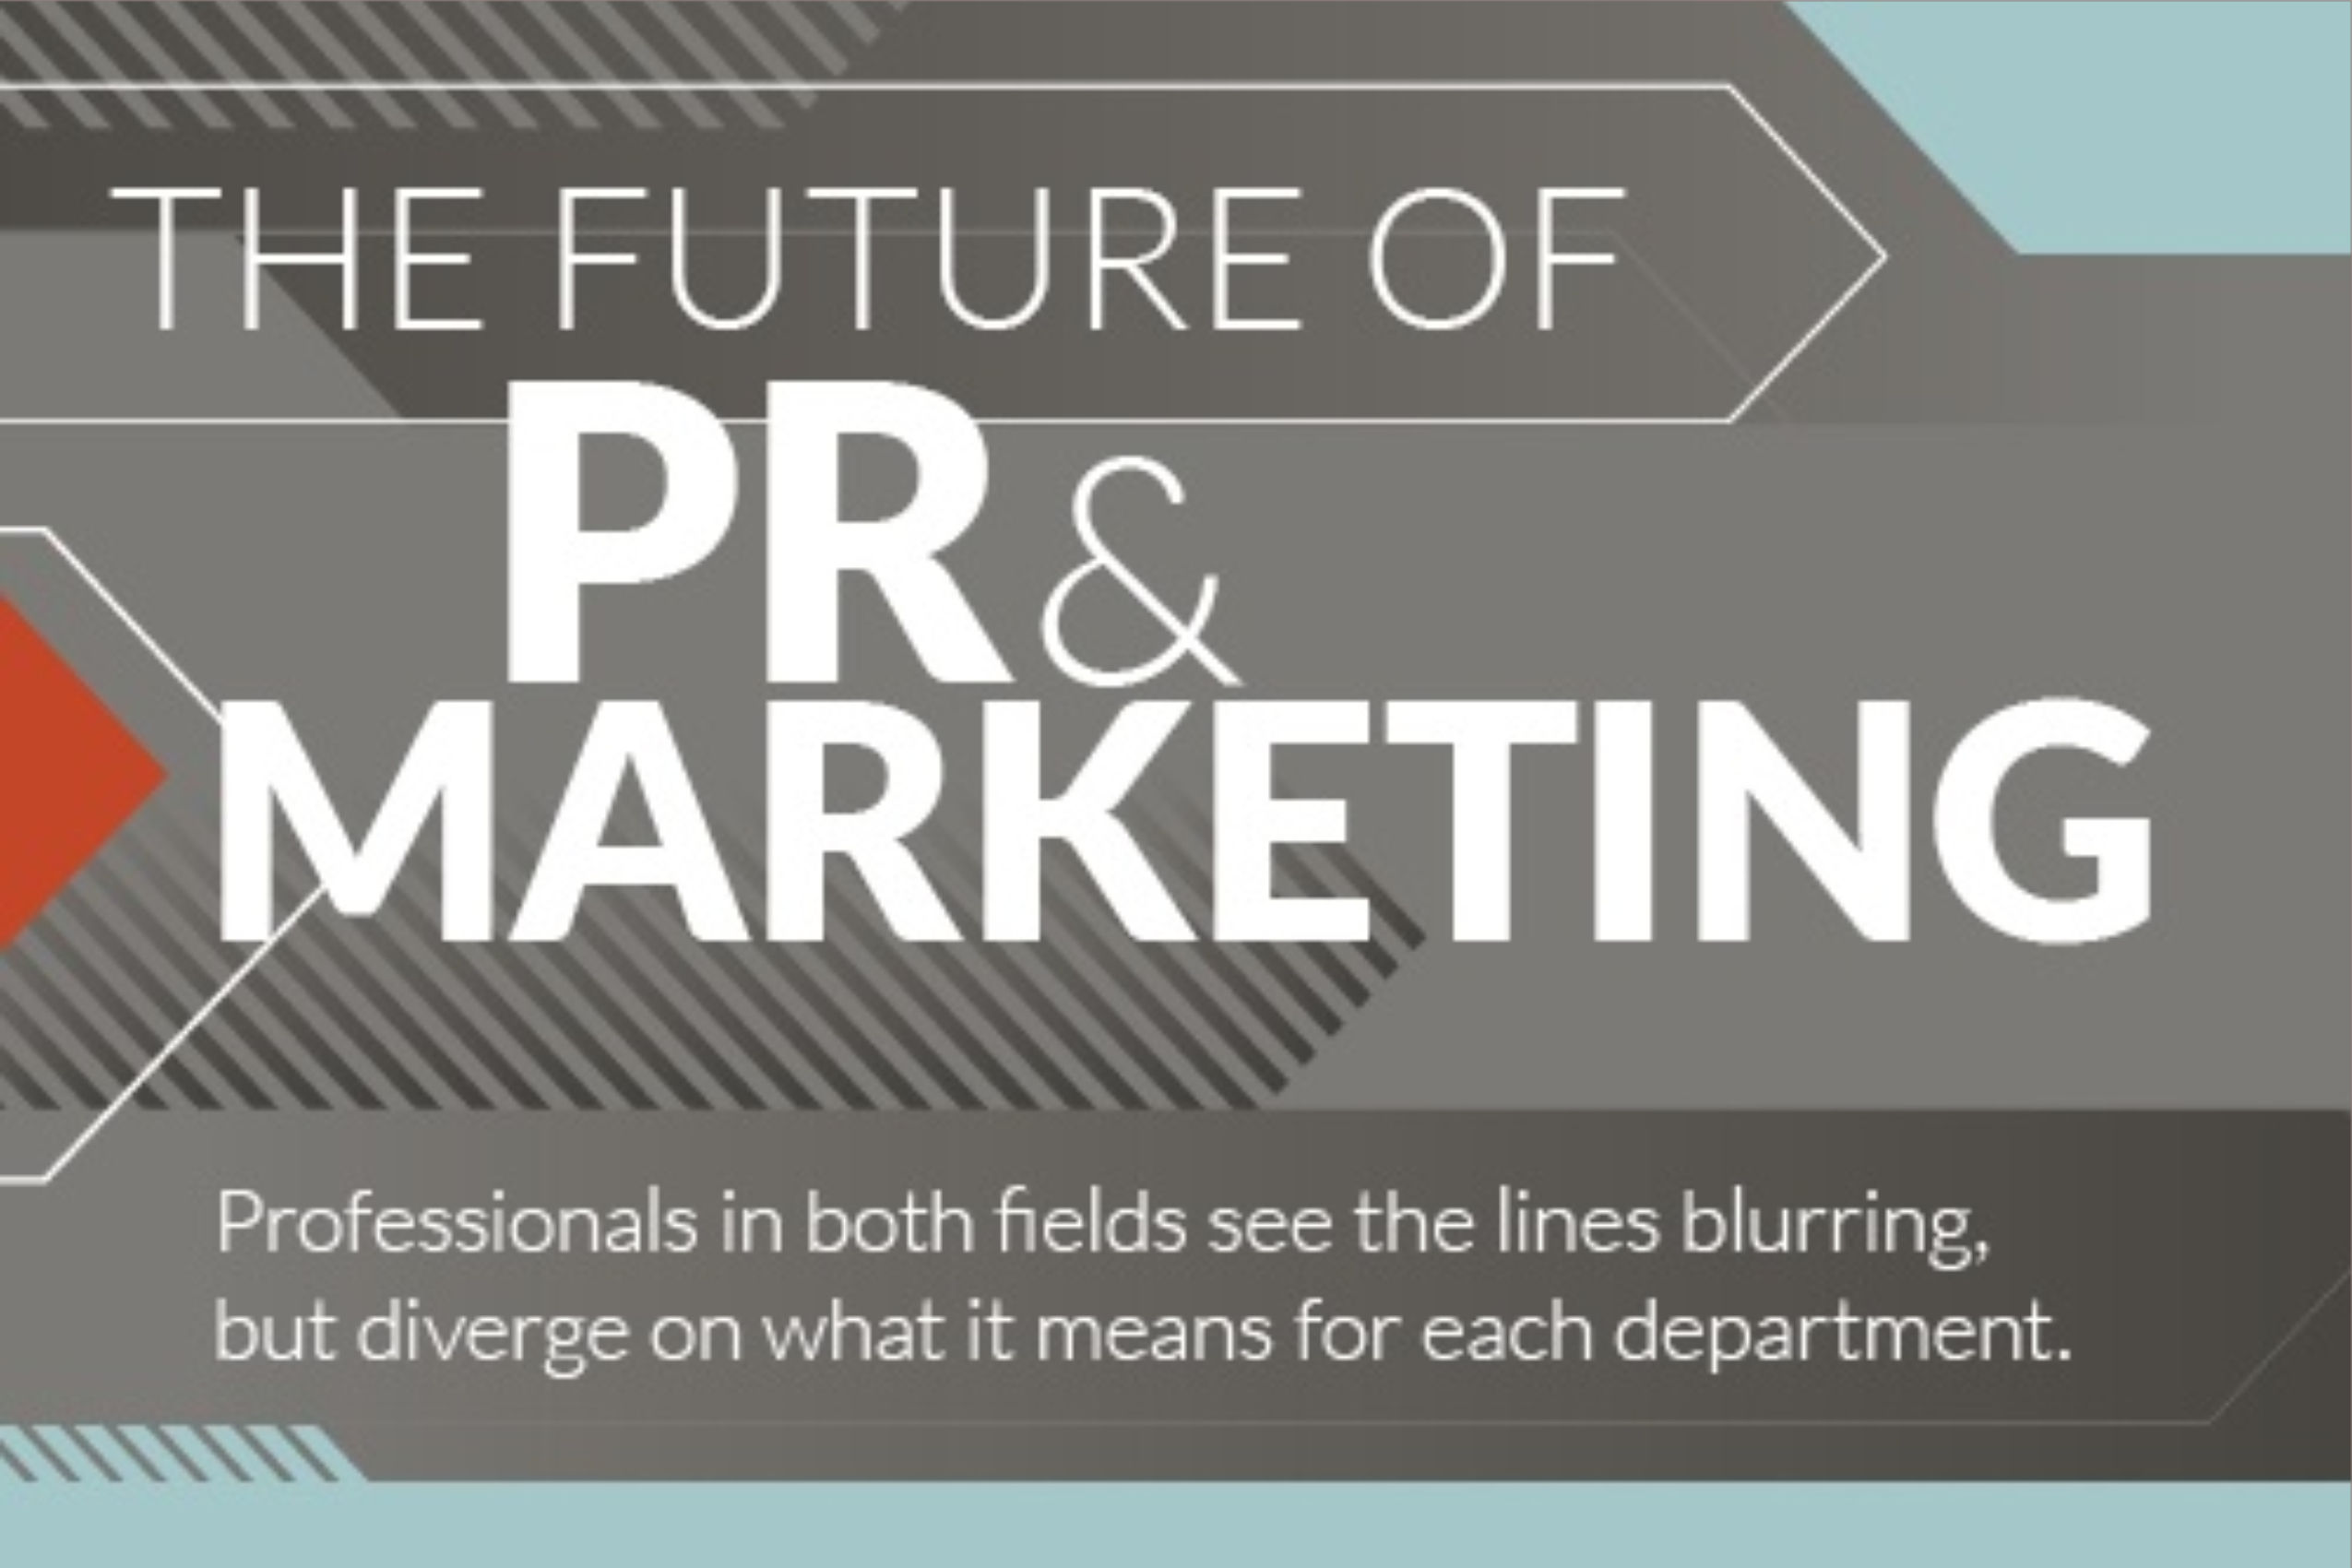 How Are Marketing & PR Changing? (infographic)